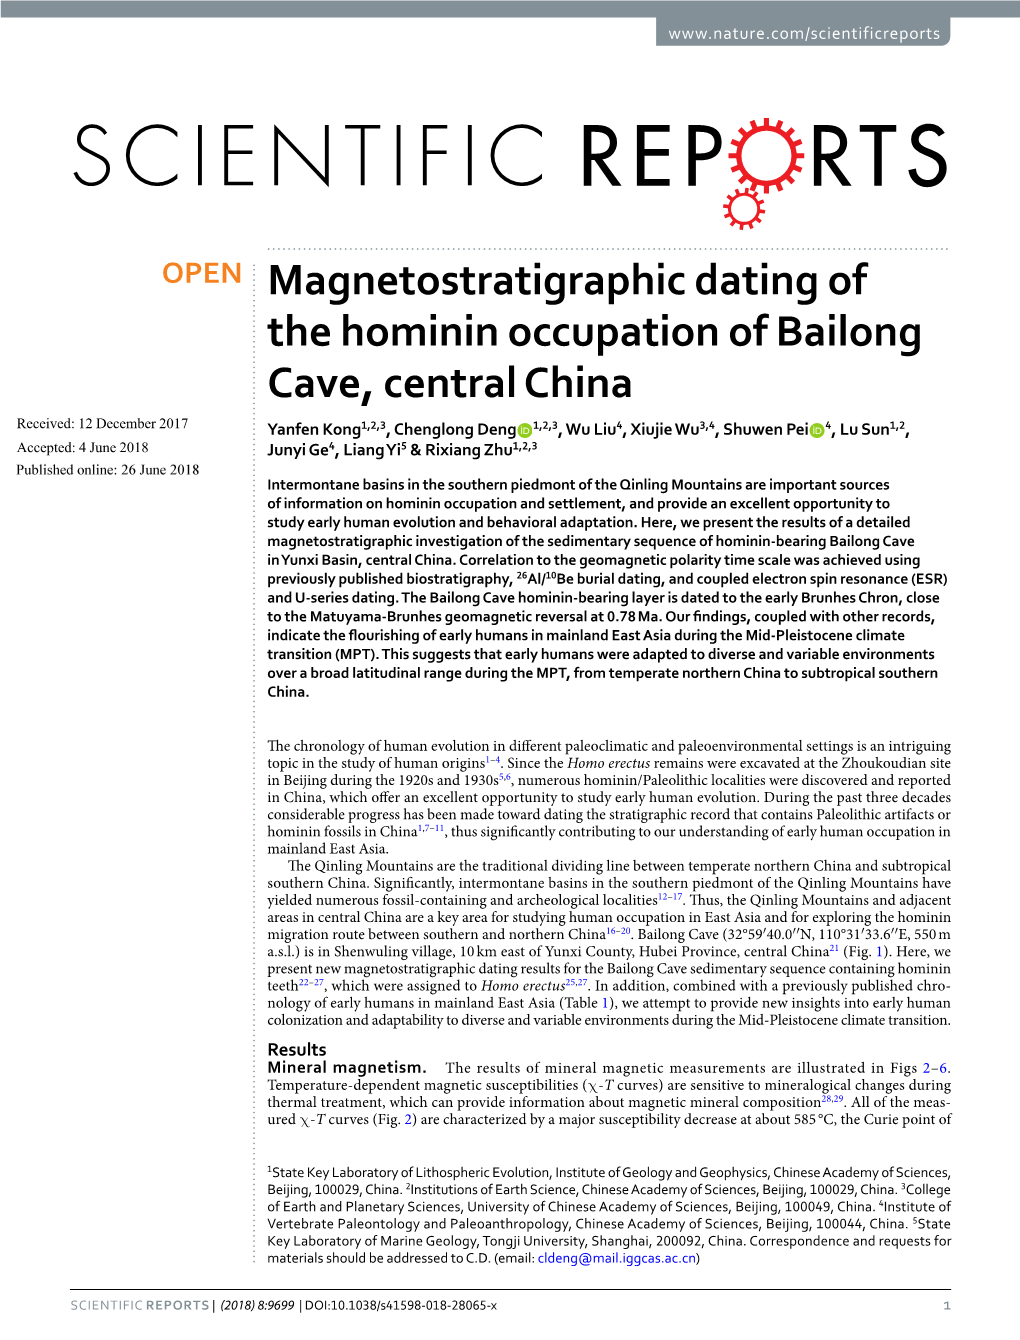 Magnetostratigraphic Dating of the Hominin Occupation of Bailong